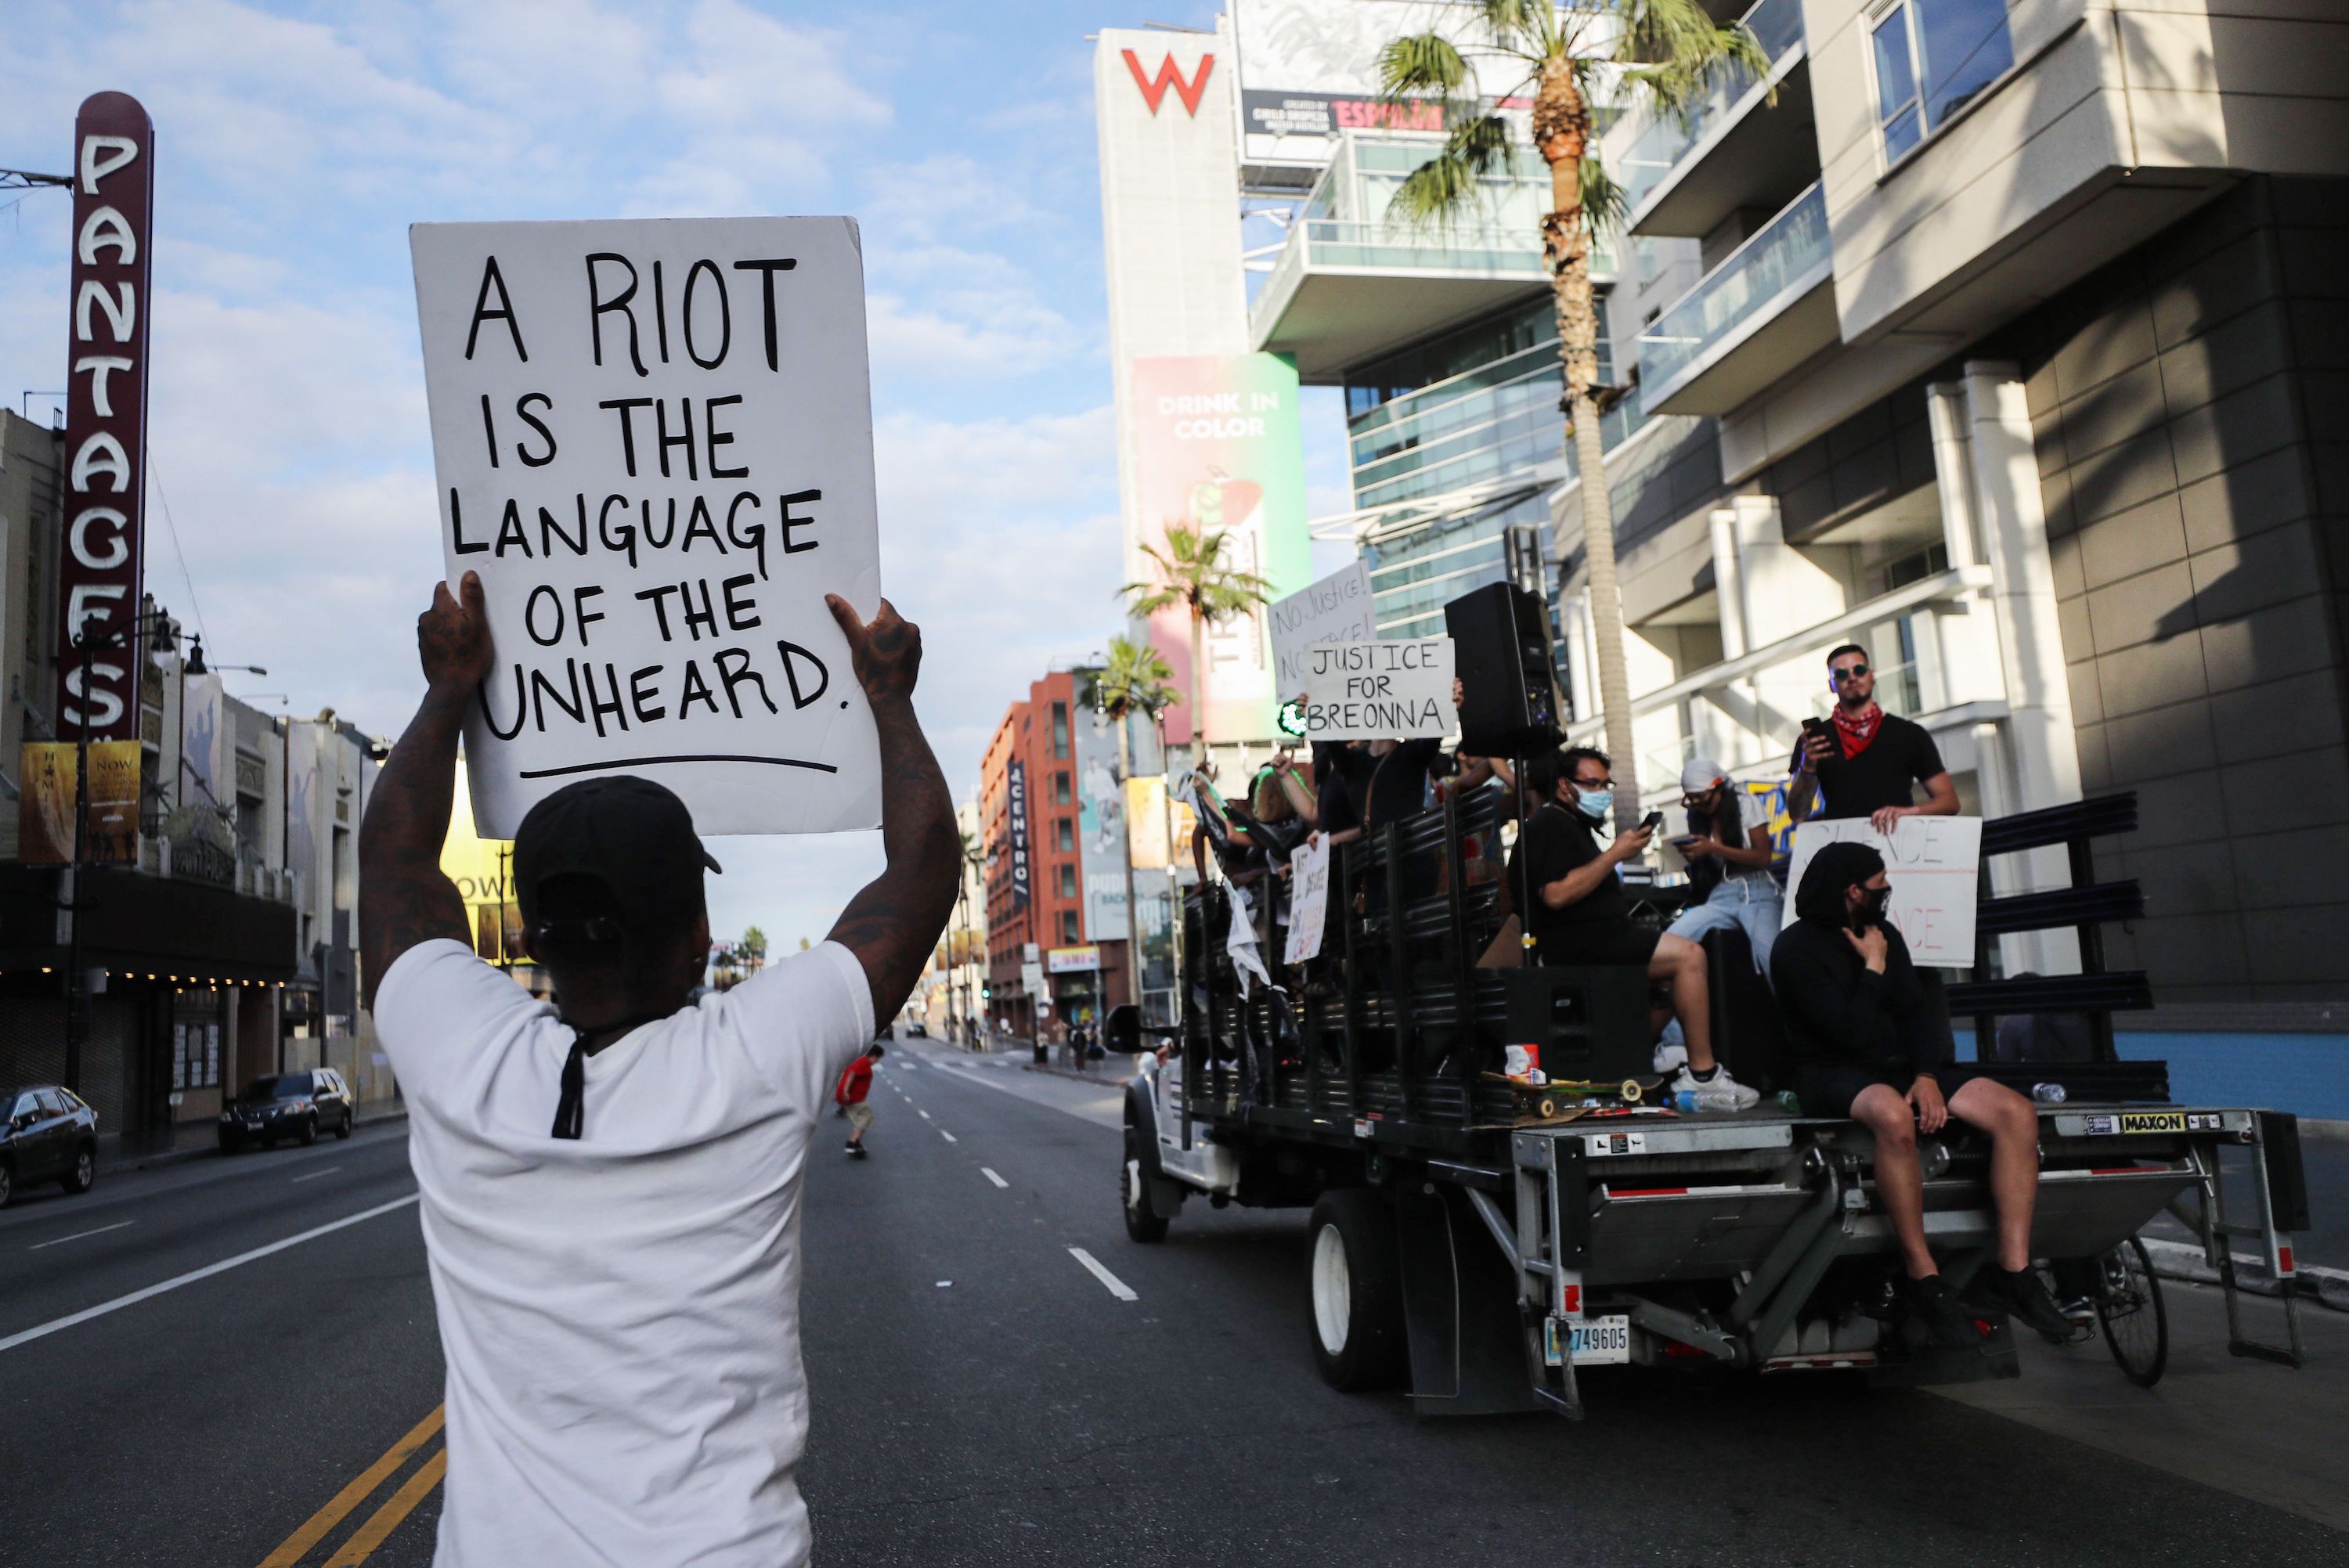 A man protests police brutality in Los Angeles